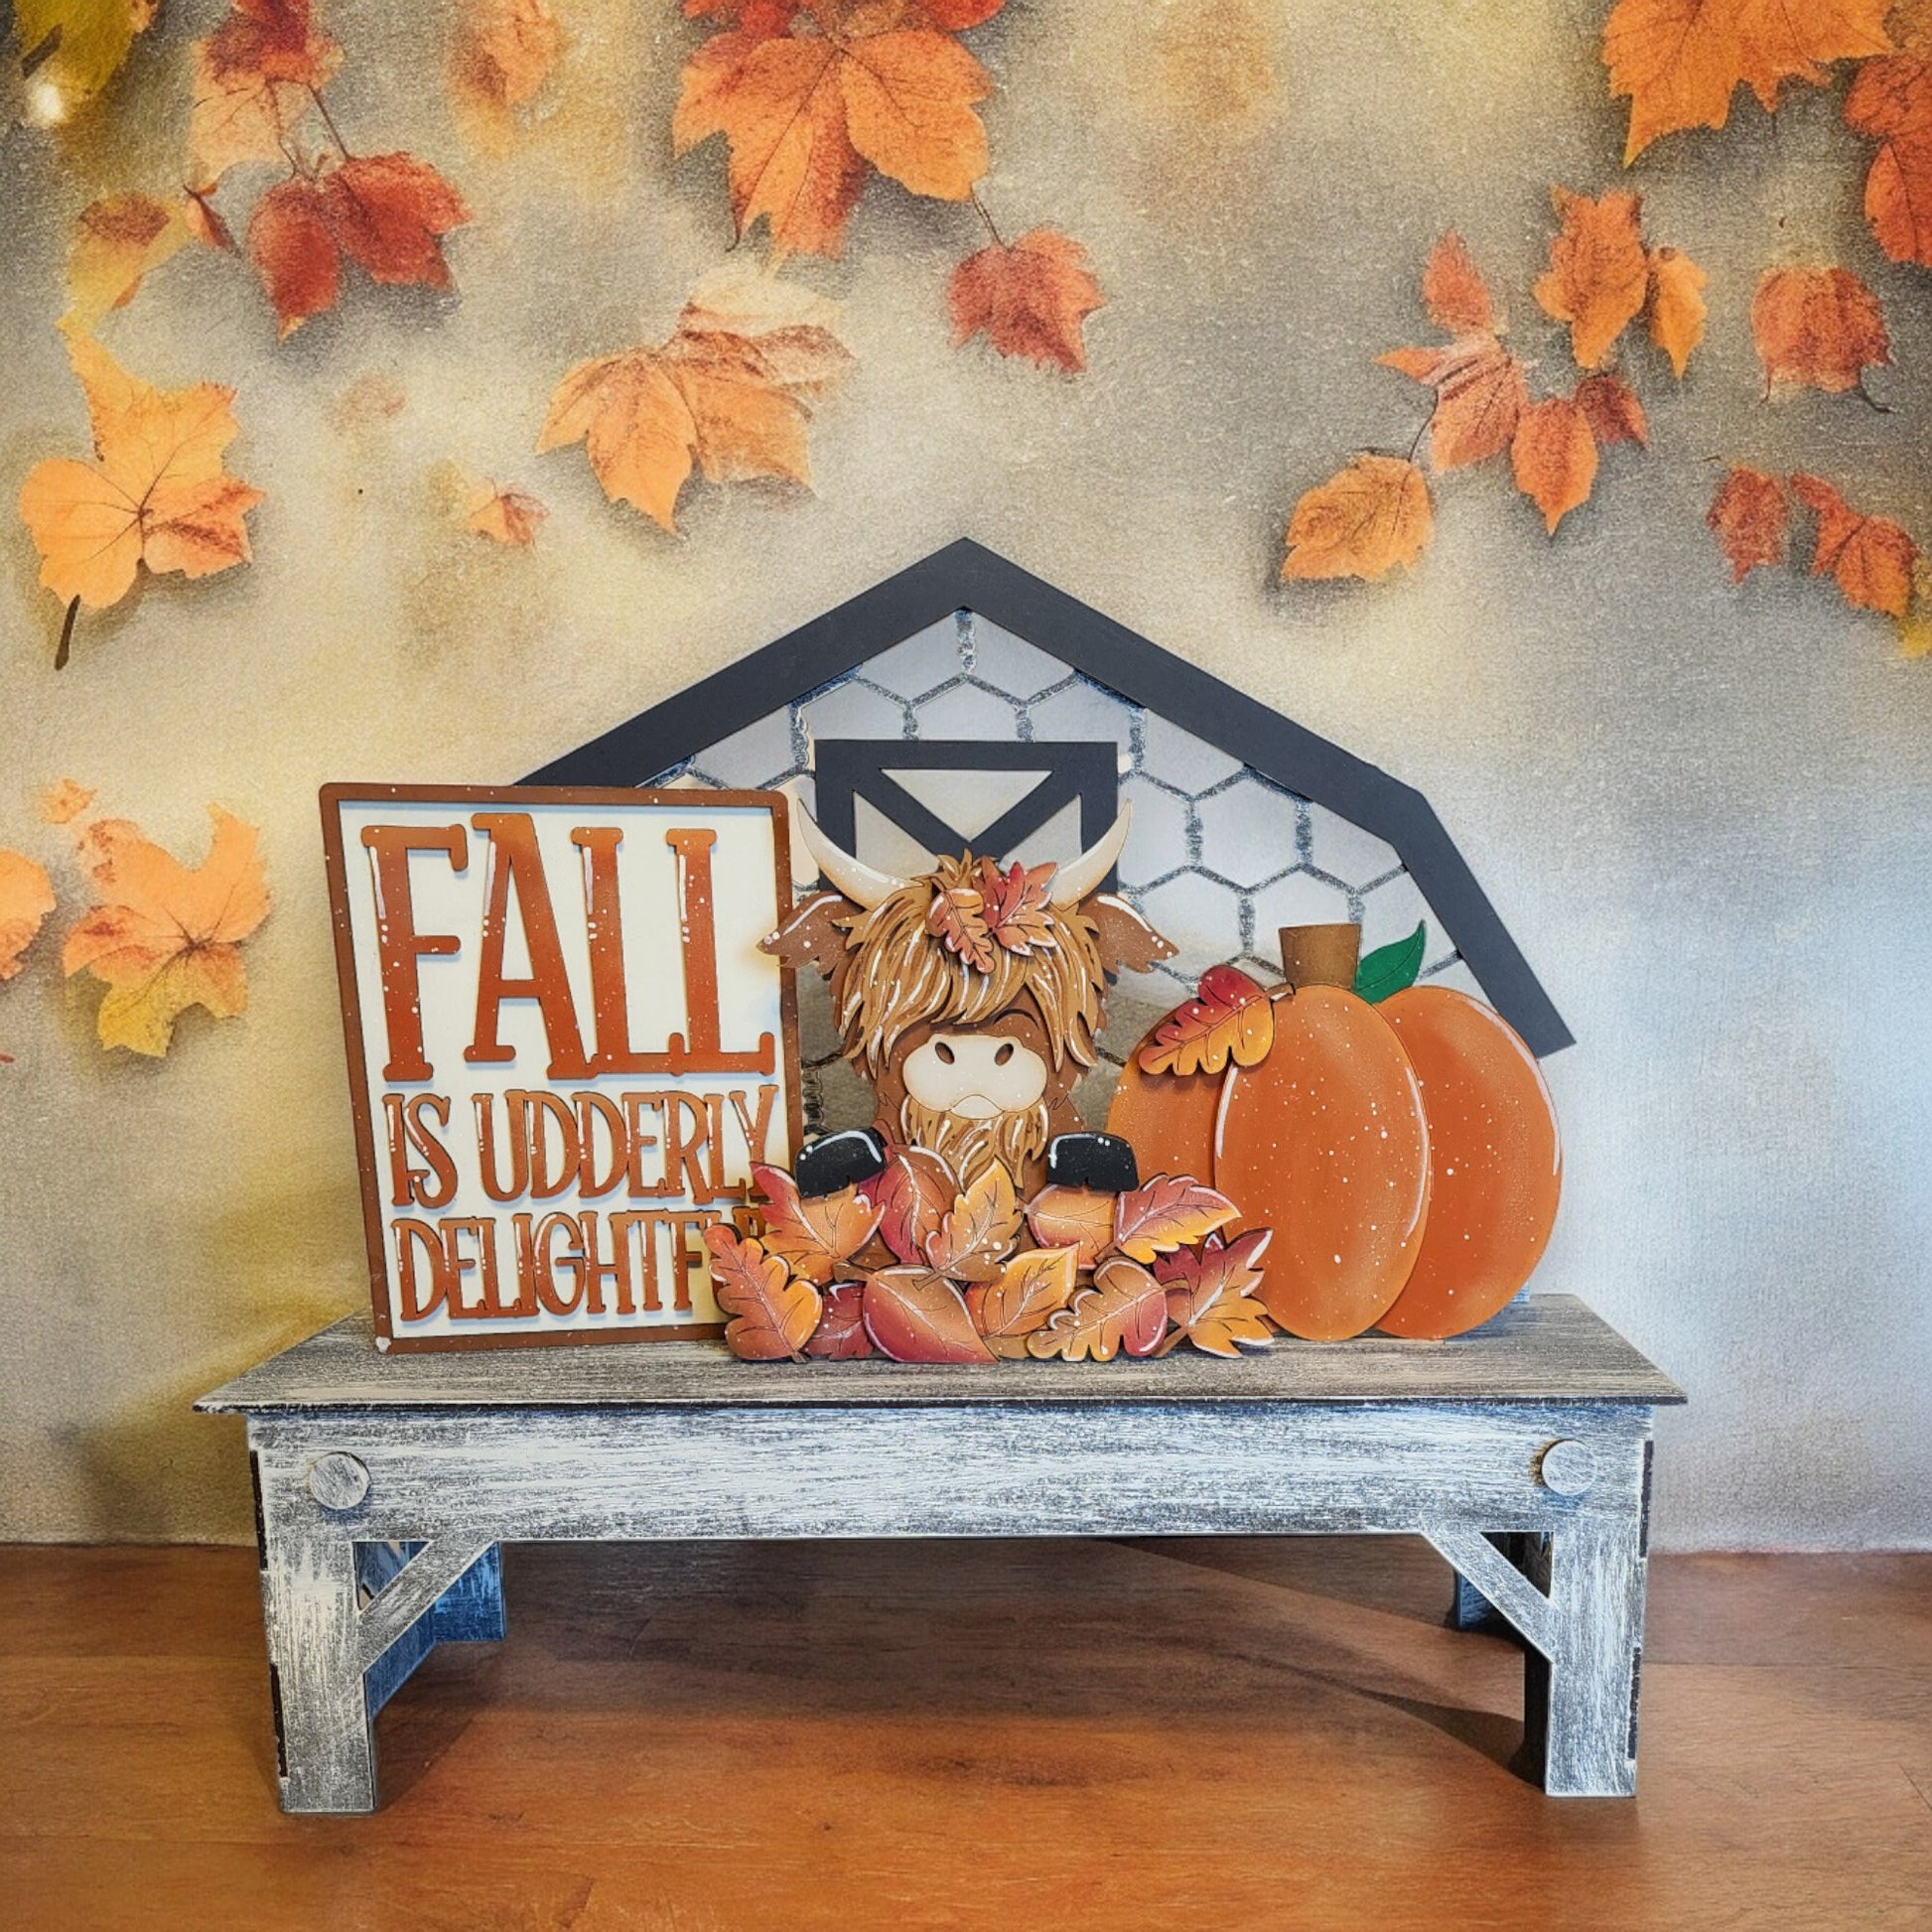 a wooden table topped with a stuffed animal and a sign